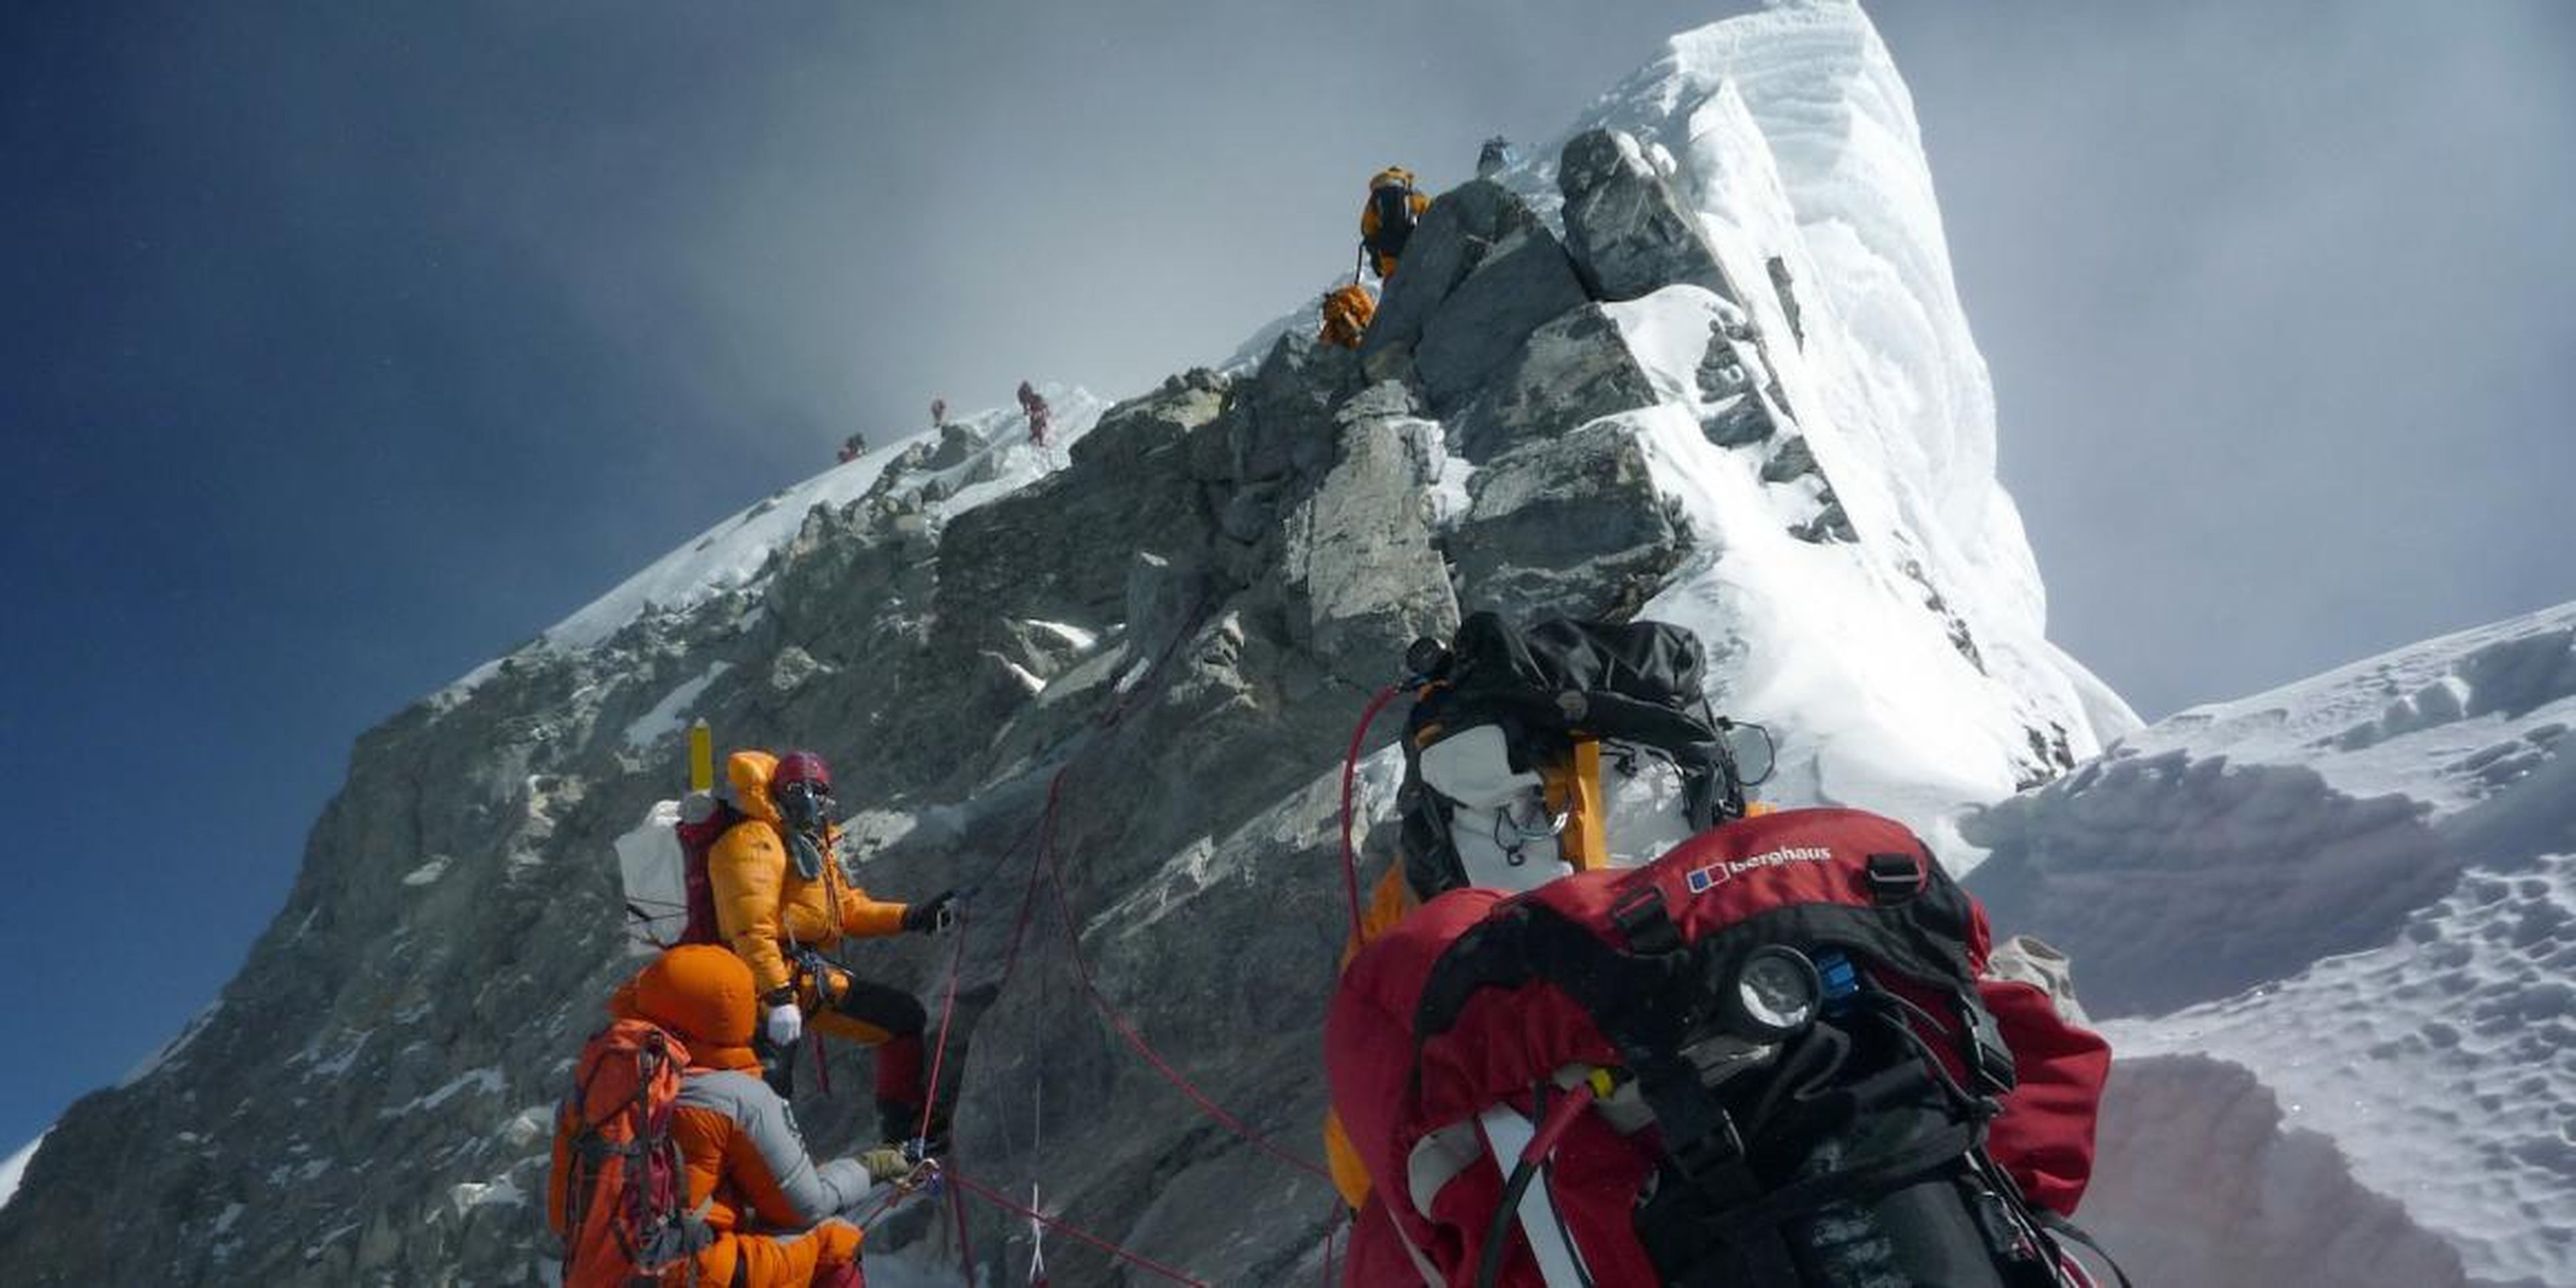 Climbers walk past the Hillary Step while pushing for Everest's summit in 2009.